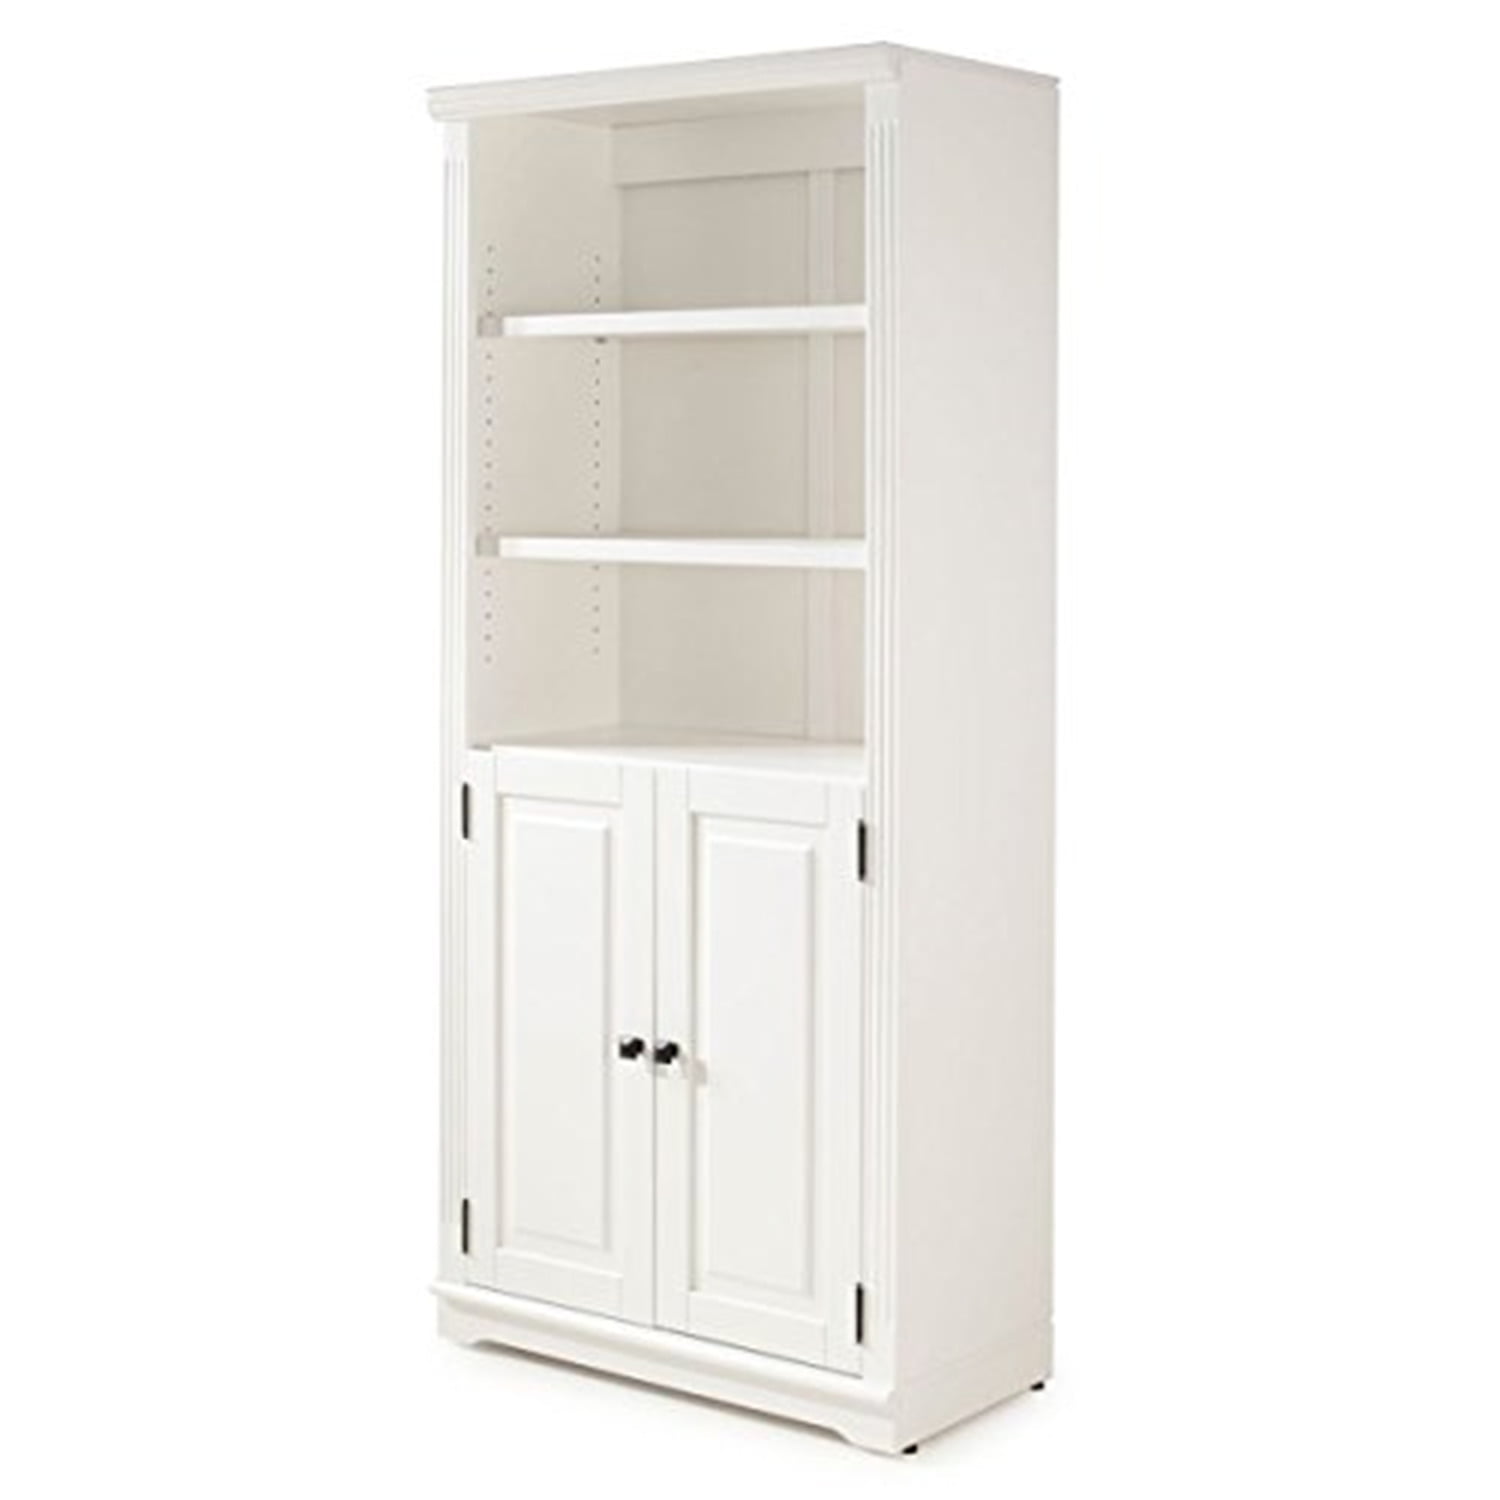 Newport Bookcase With Doors Multiple, White Solid Wood Bookcase With Doors